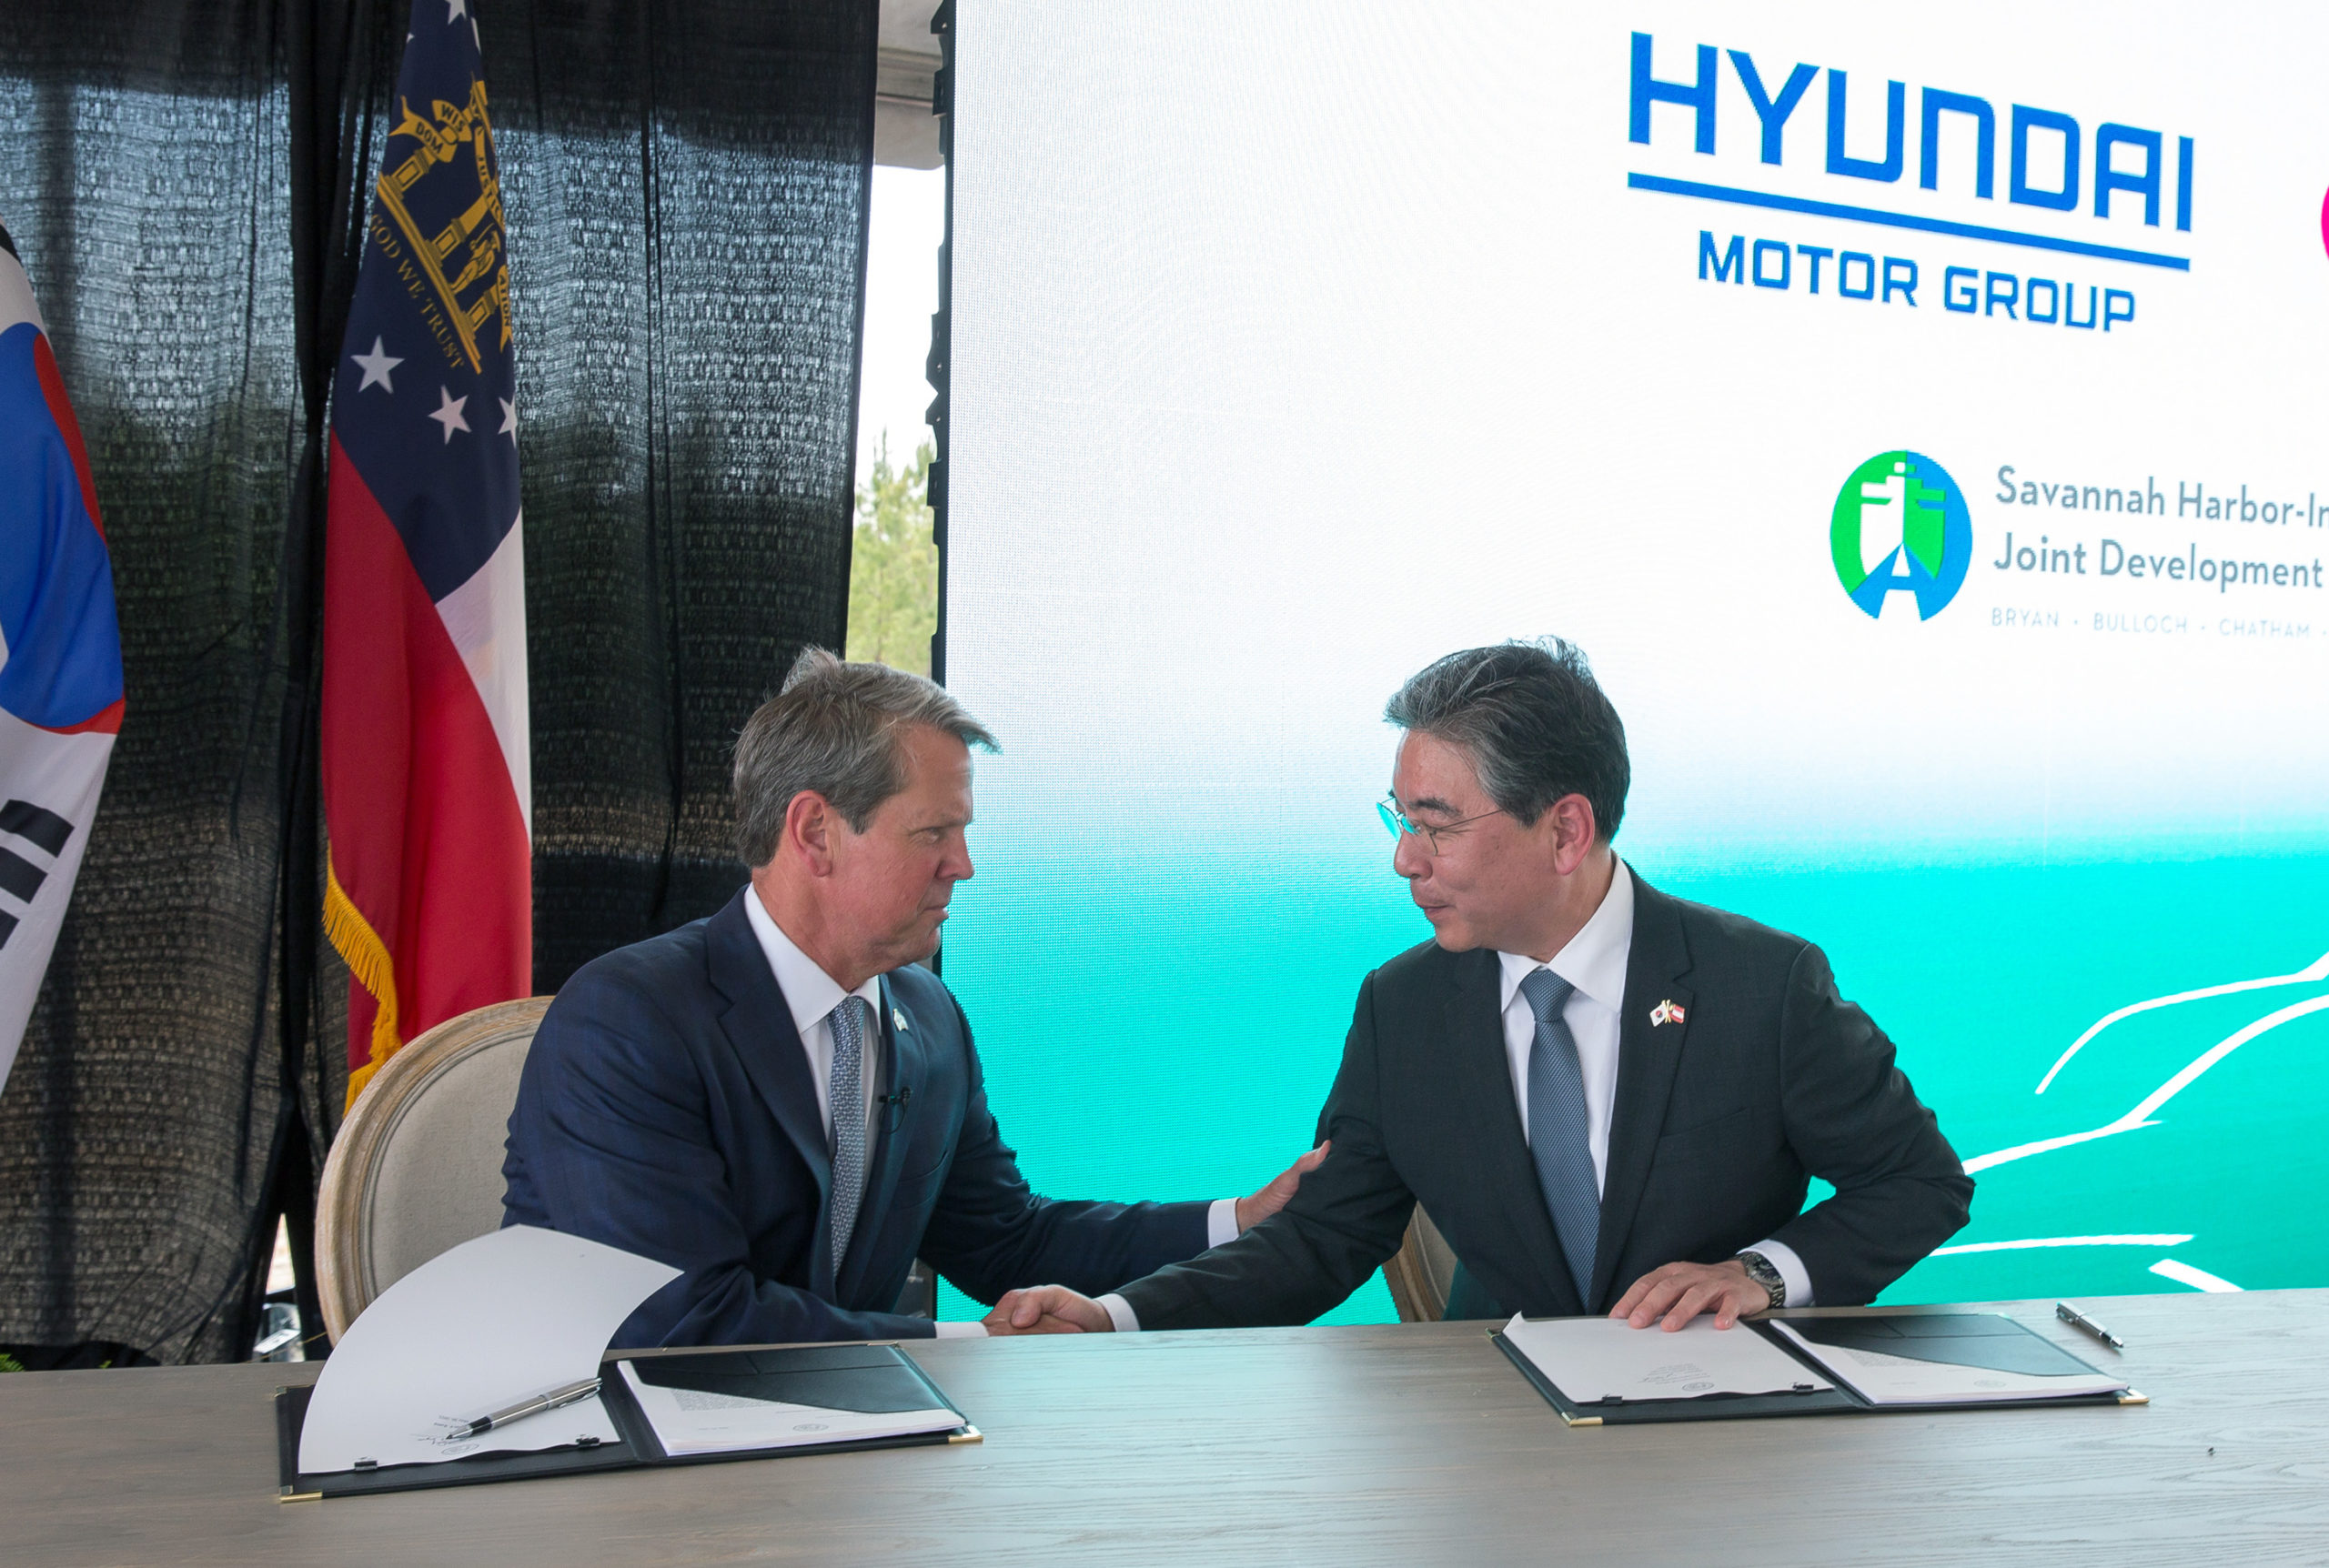 Georgia Governor Brian P. Kemp, left, and Hyundai Motor Company President and CEO Jaehoon Chang sign an agreement for Hyundai's new EV facility in the state.